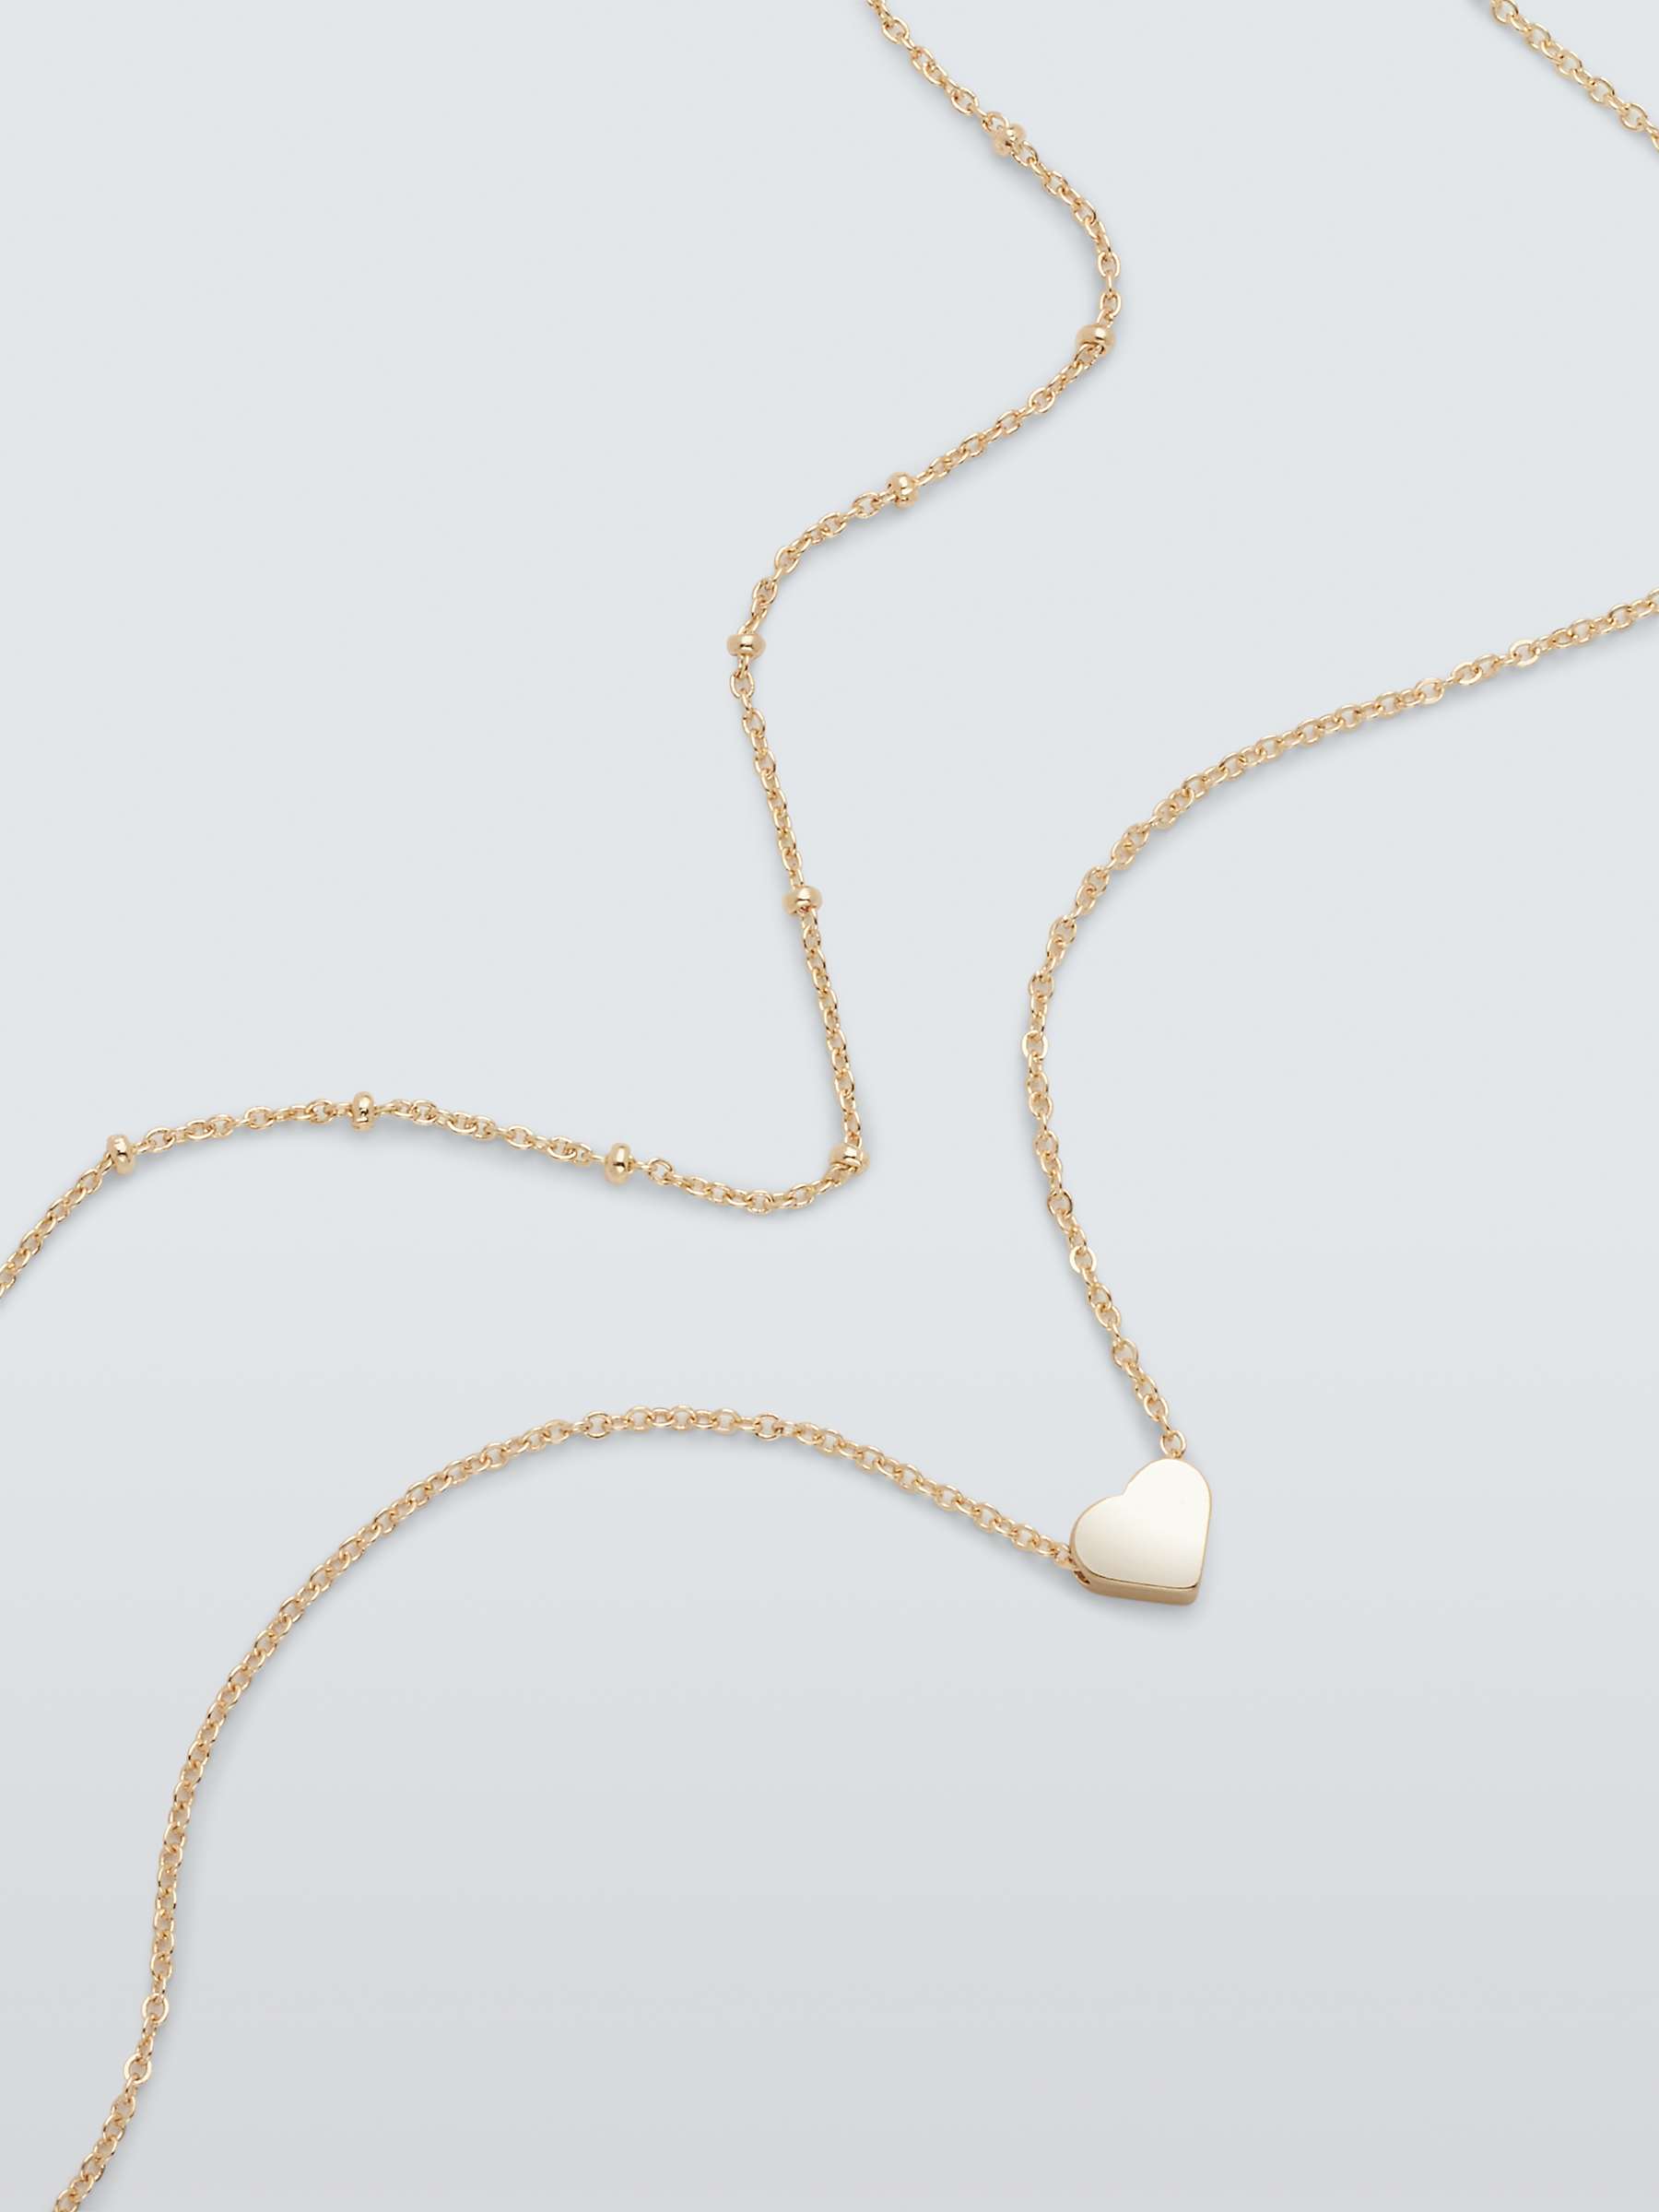 Buy John Lewis Heart Layered Chain Necklace, Pack of 2 Online at johnlewis.com